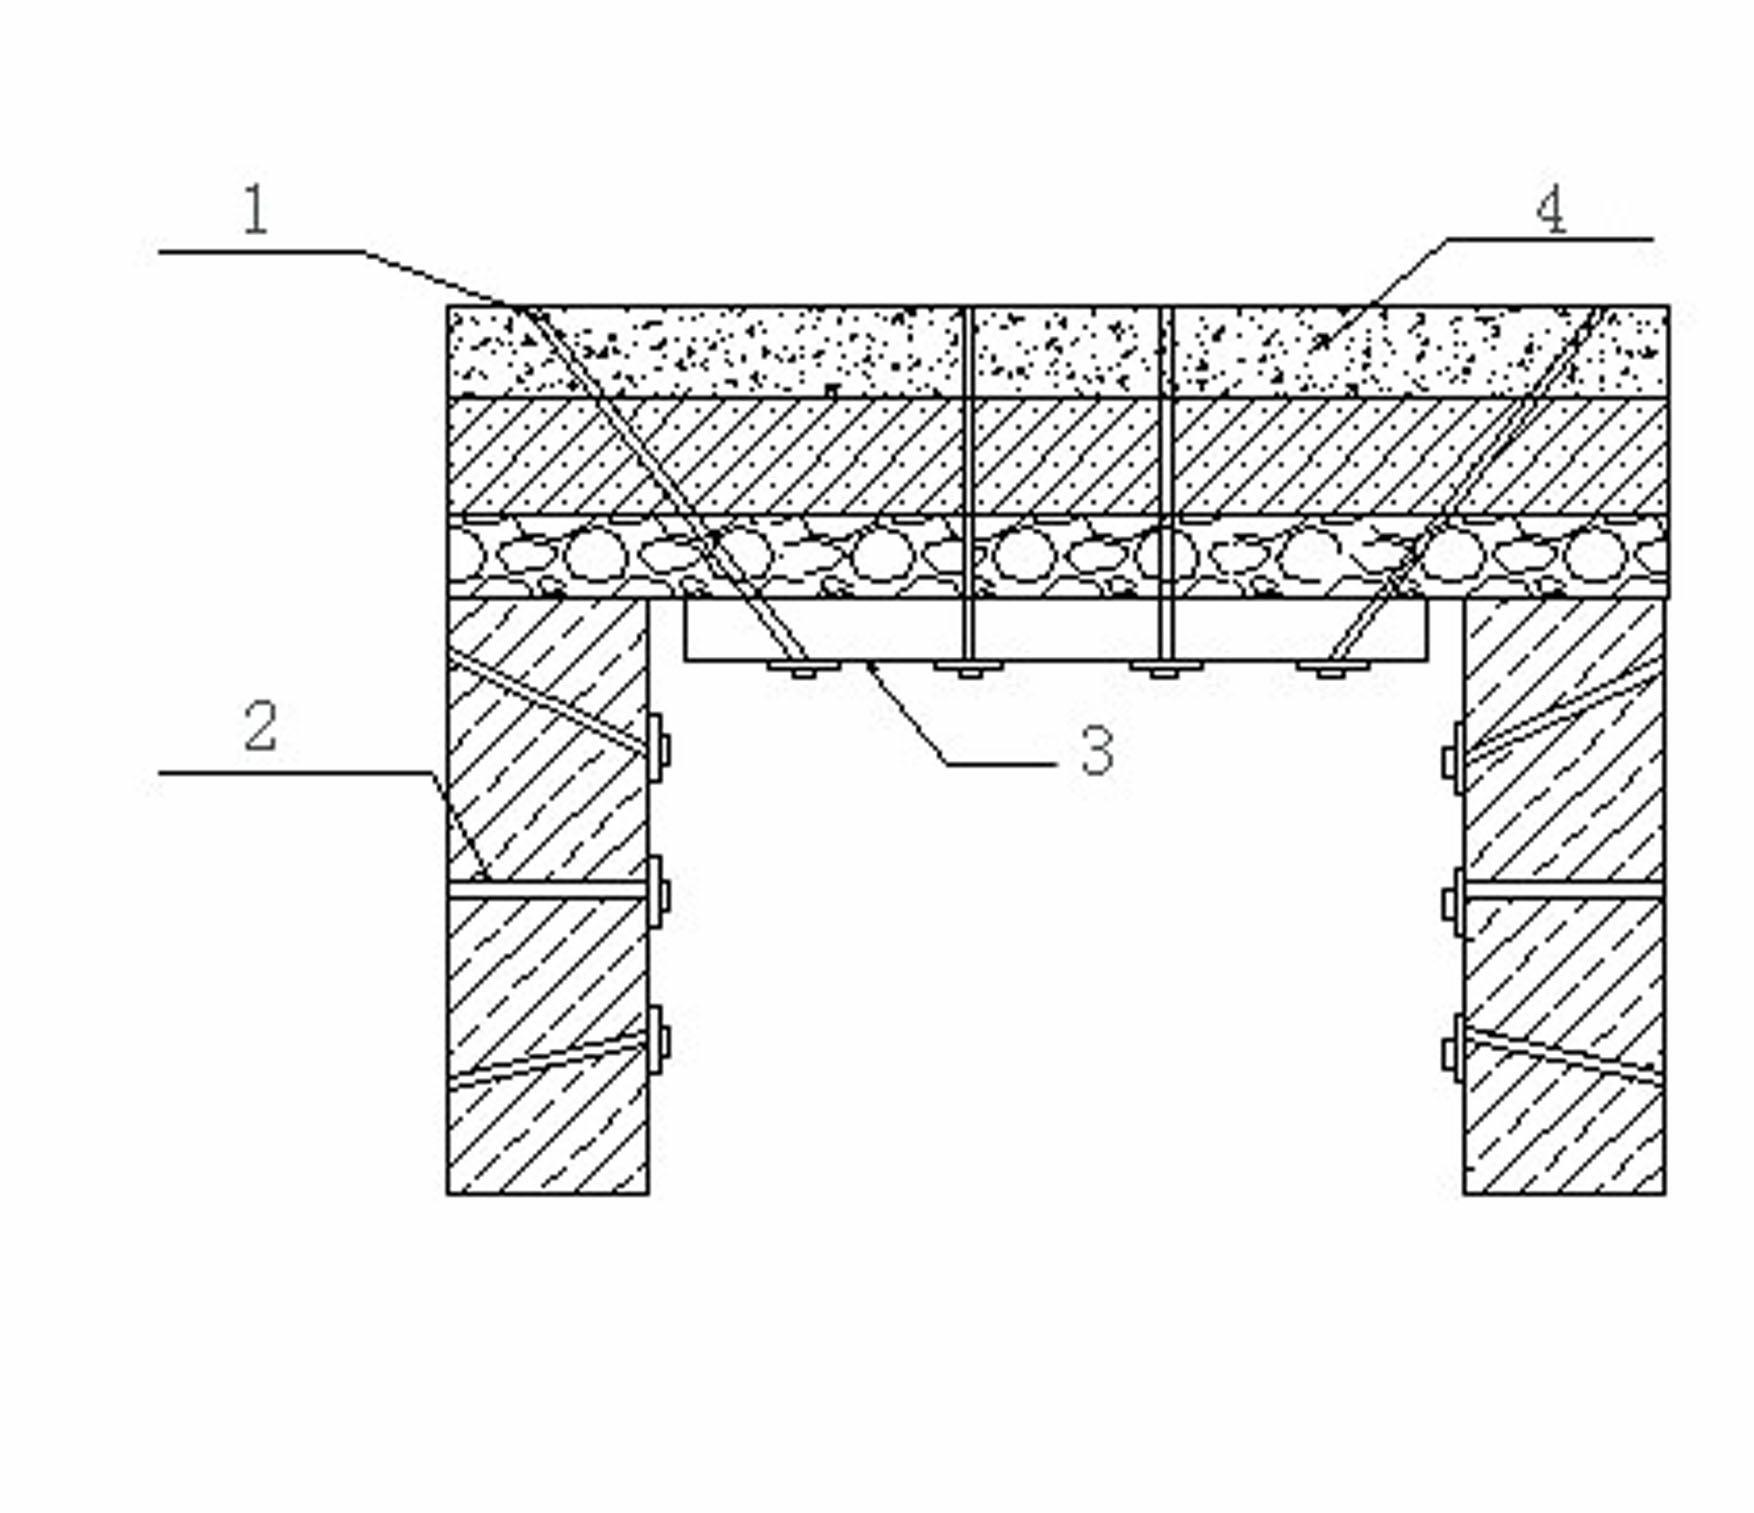 Supporting method of laneway under multiple goafs in ultra-close coal seam group